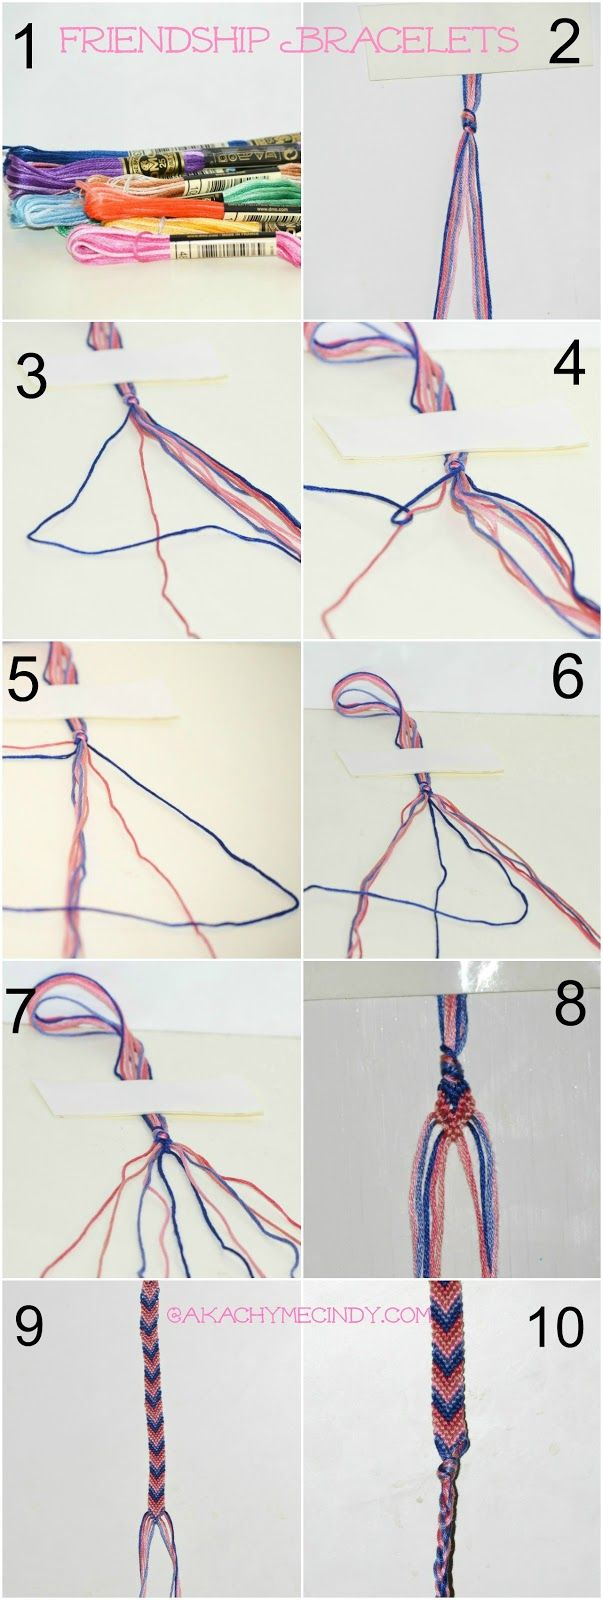 Bracelet Patterns With Embroidery Floss 18 Making Bracelets With Embroidery Thread 25 Best Ideas About Yarn